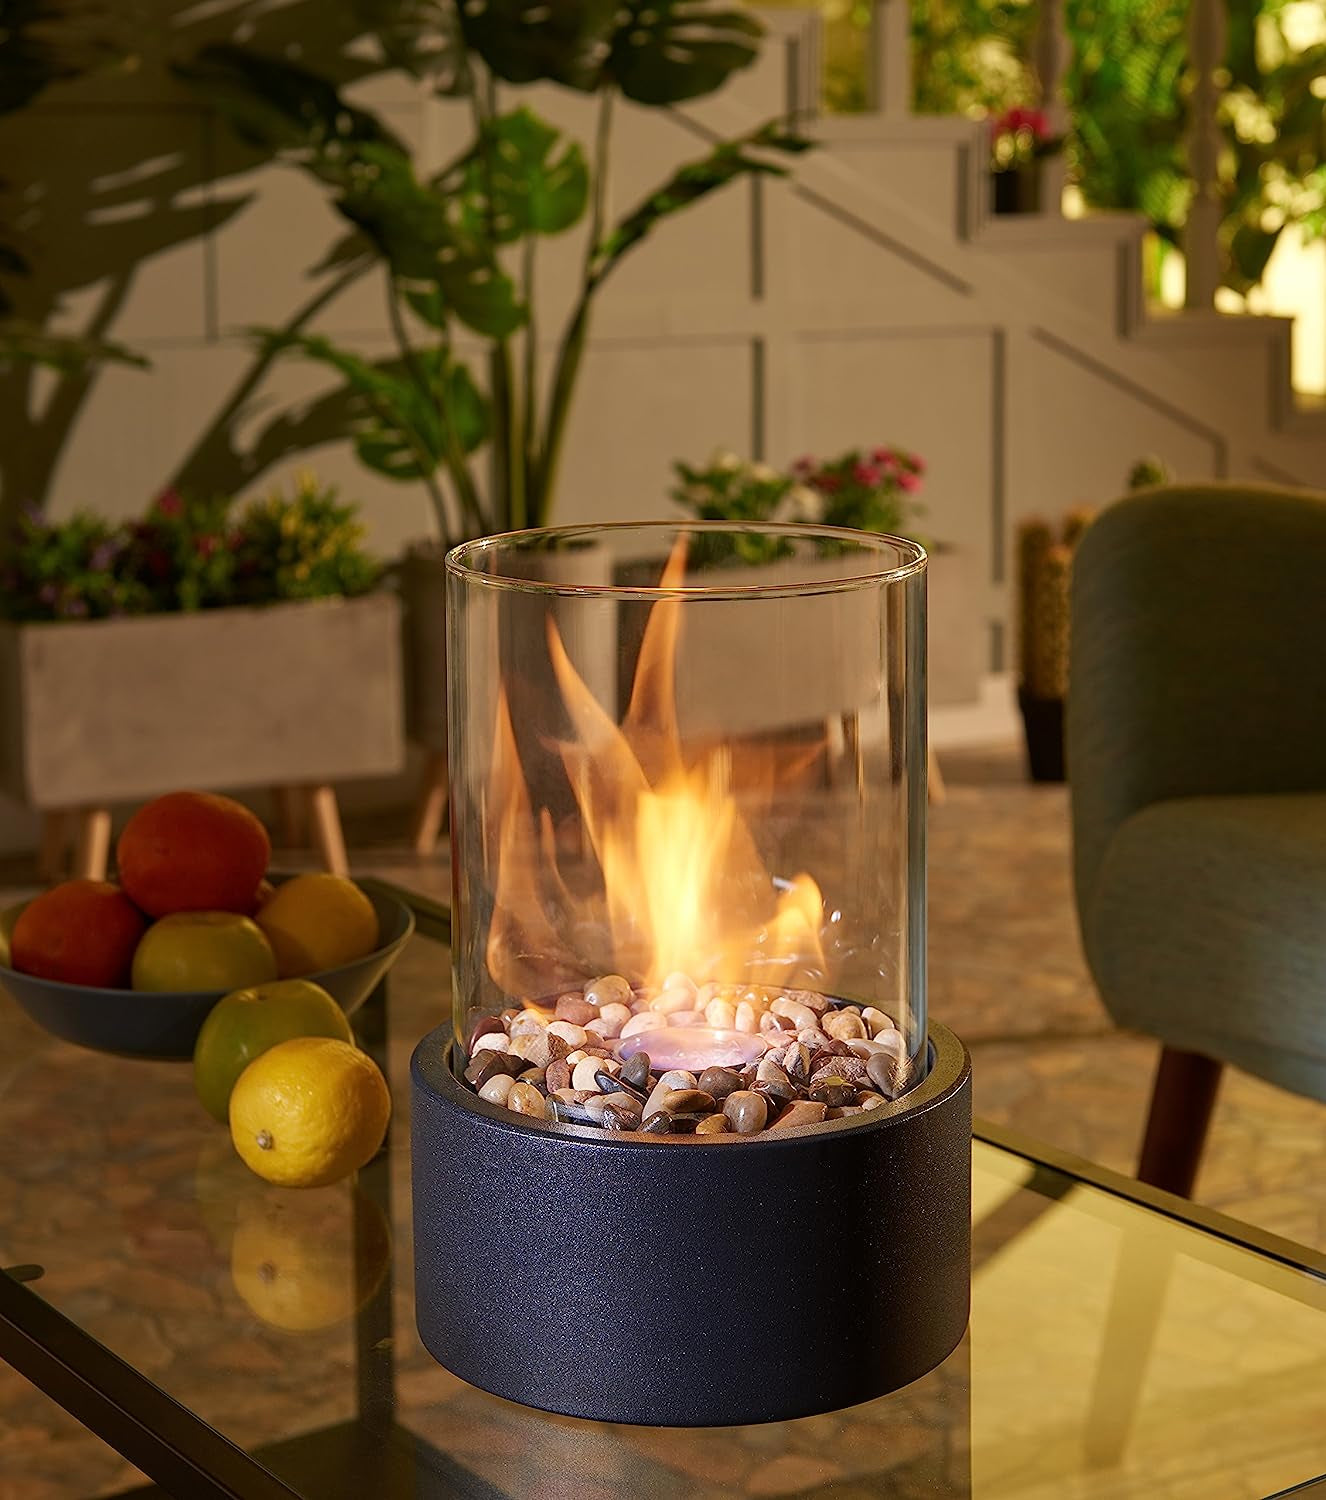 Indoor/Outdoor Portable Tabletop Fire Pit – Clean-Burning Bio Ethanol Ventless Fireplace - Small